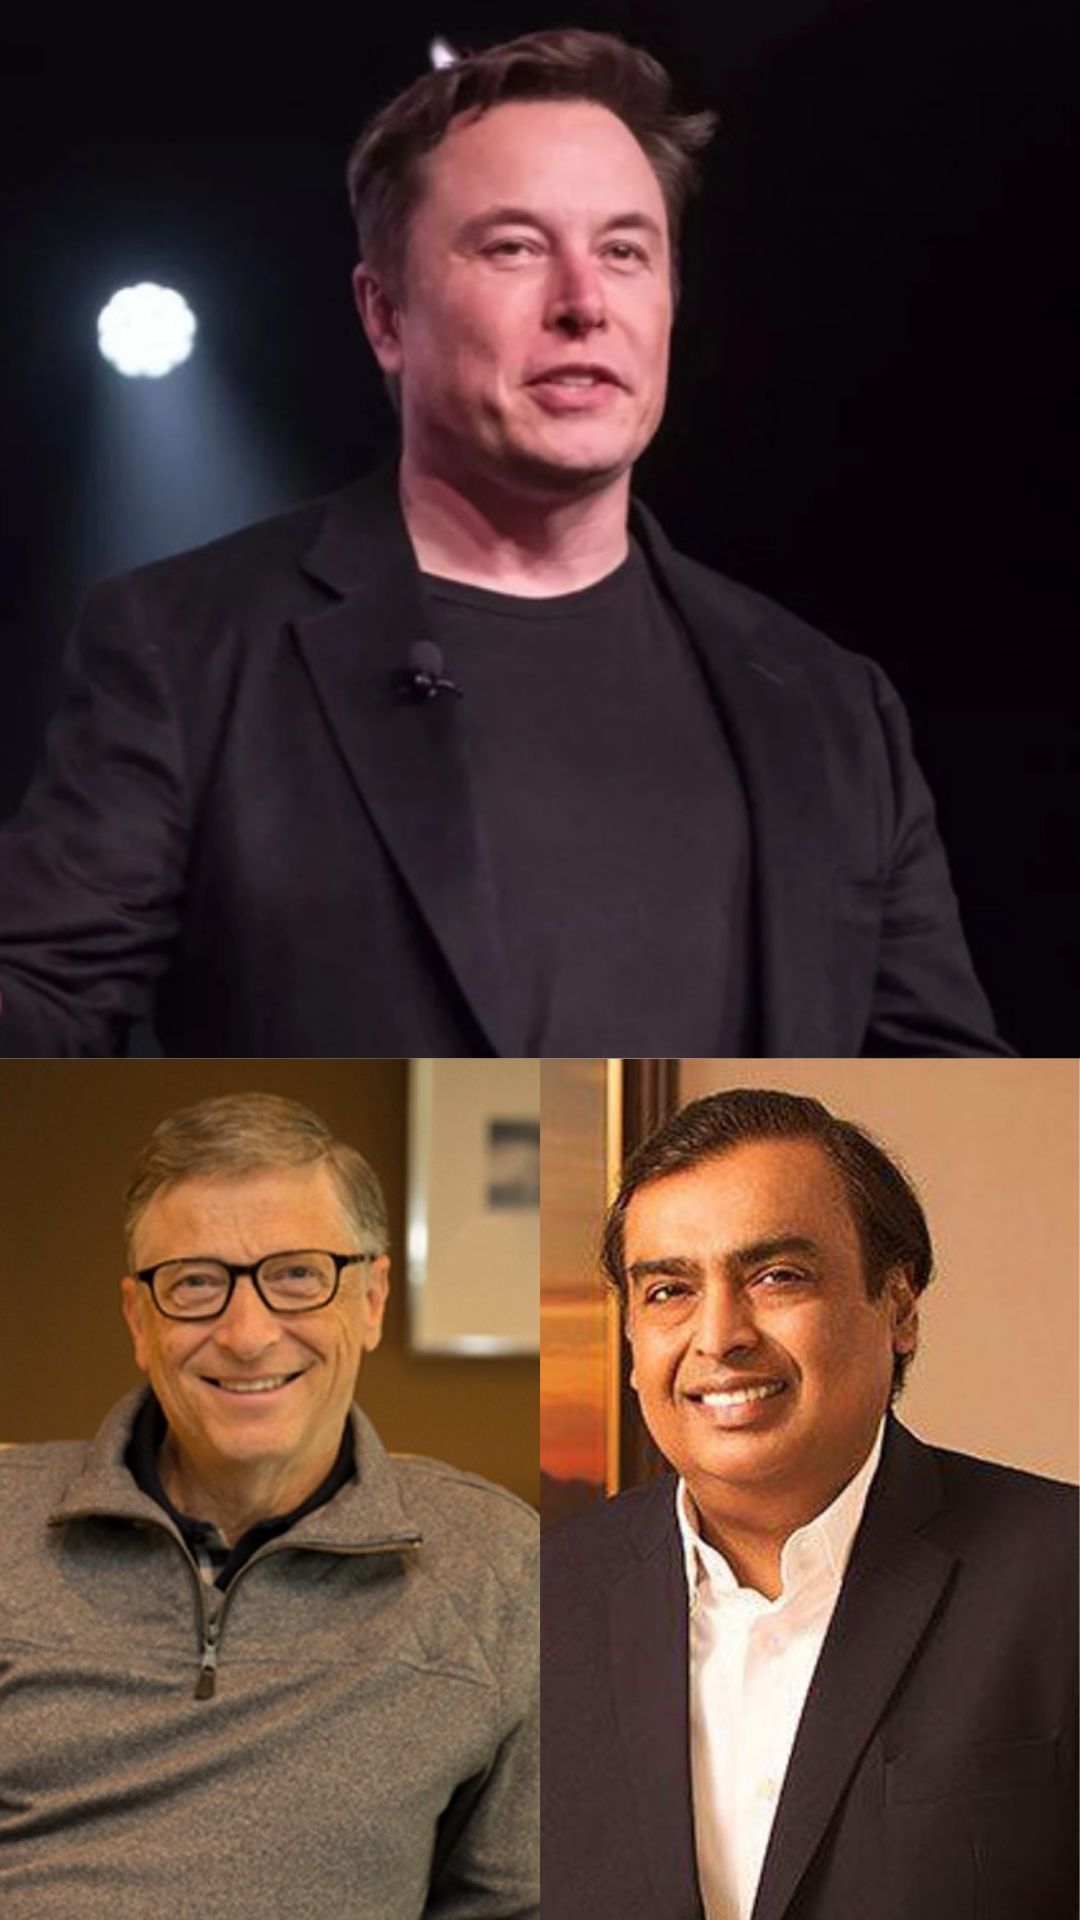 10 Richest People in the World